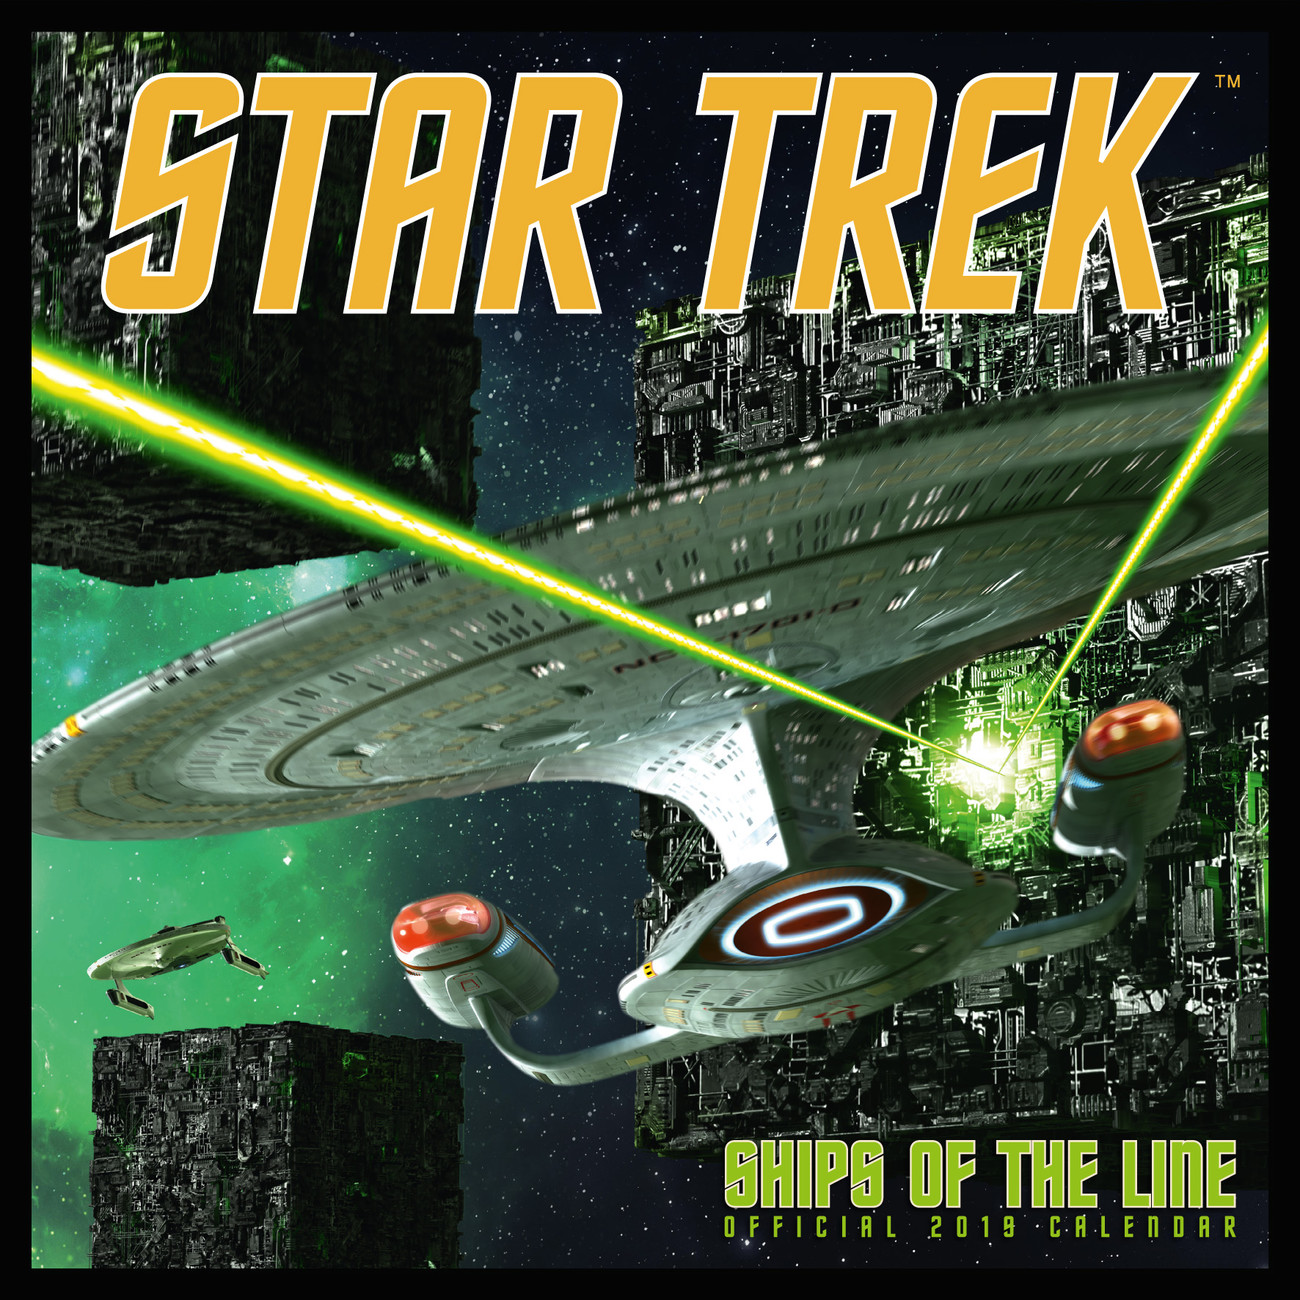 Star Trek Ships Of The Line Calendars 2021 on UKposters/UKposters